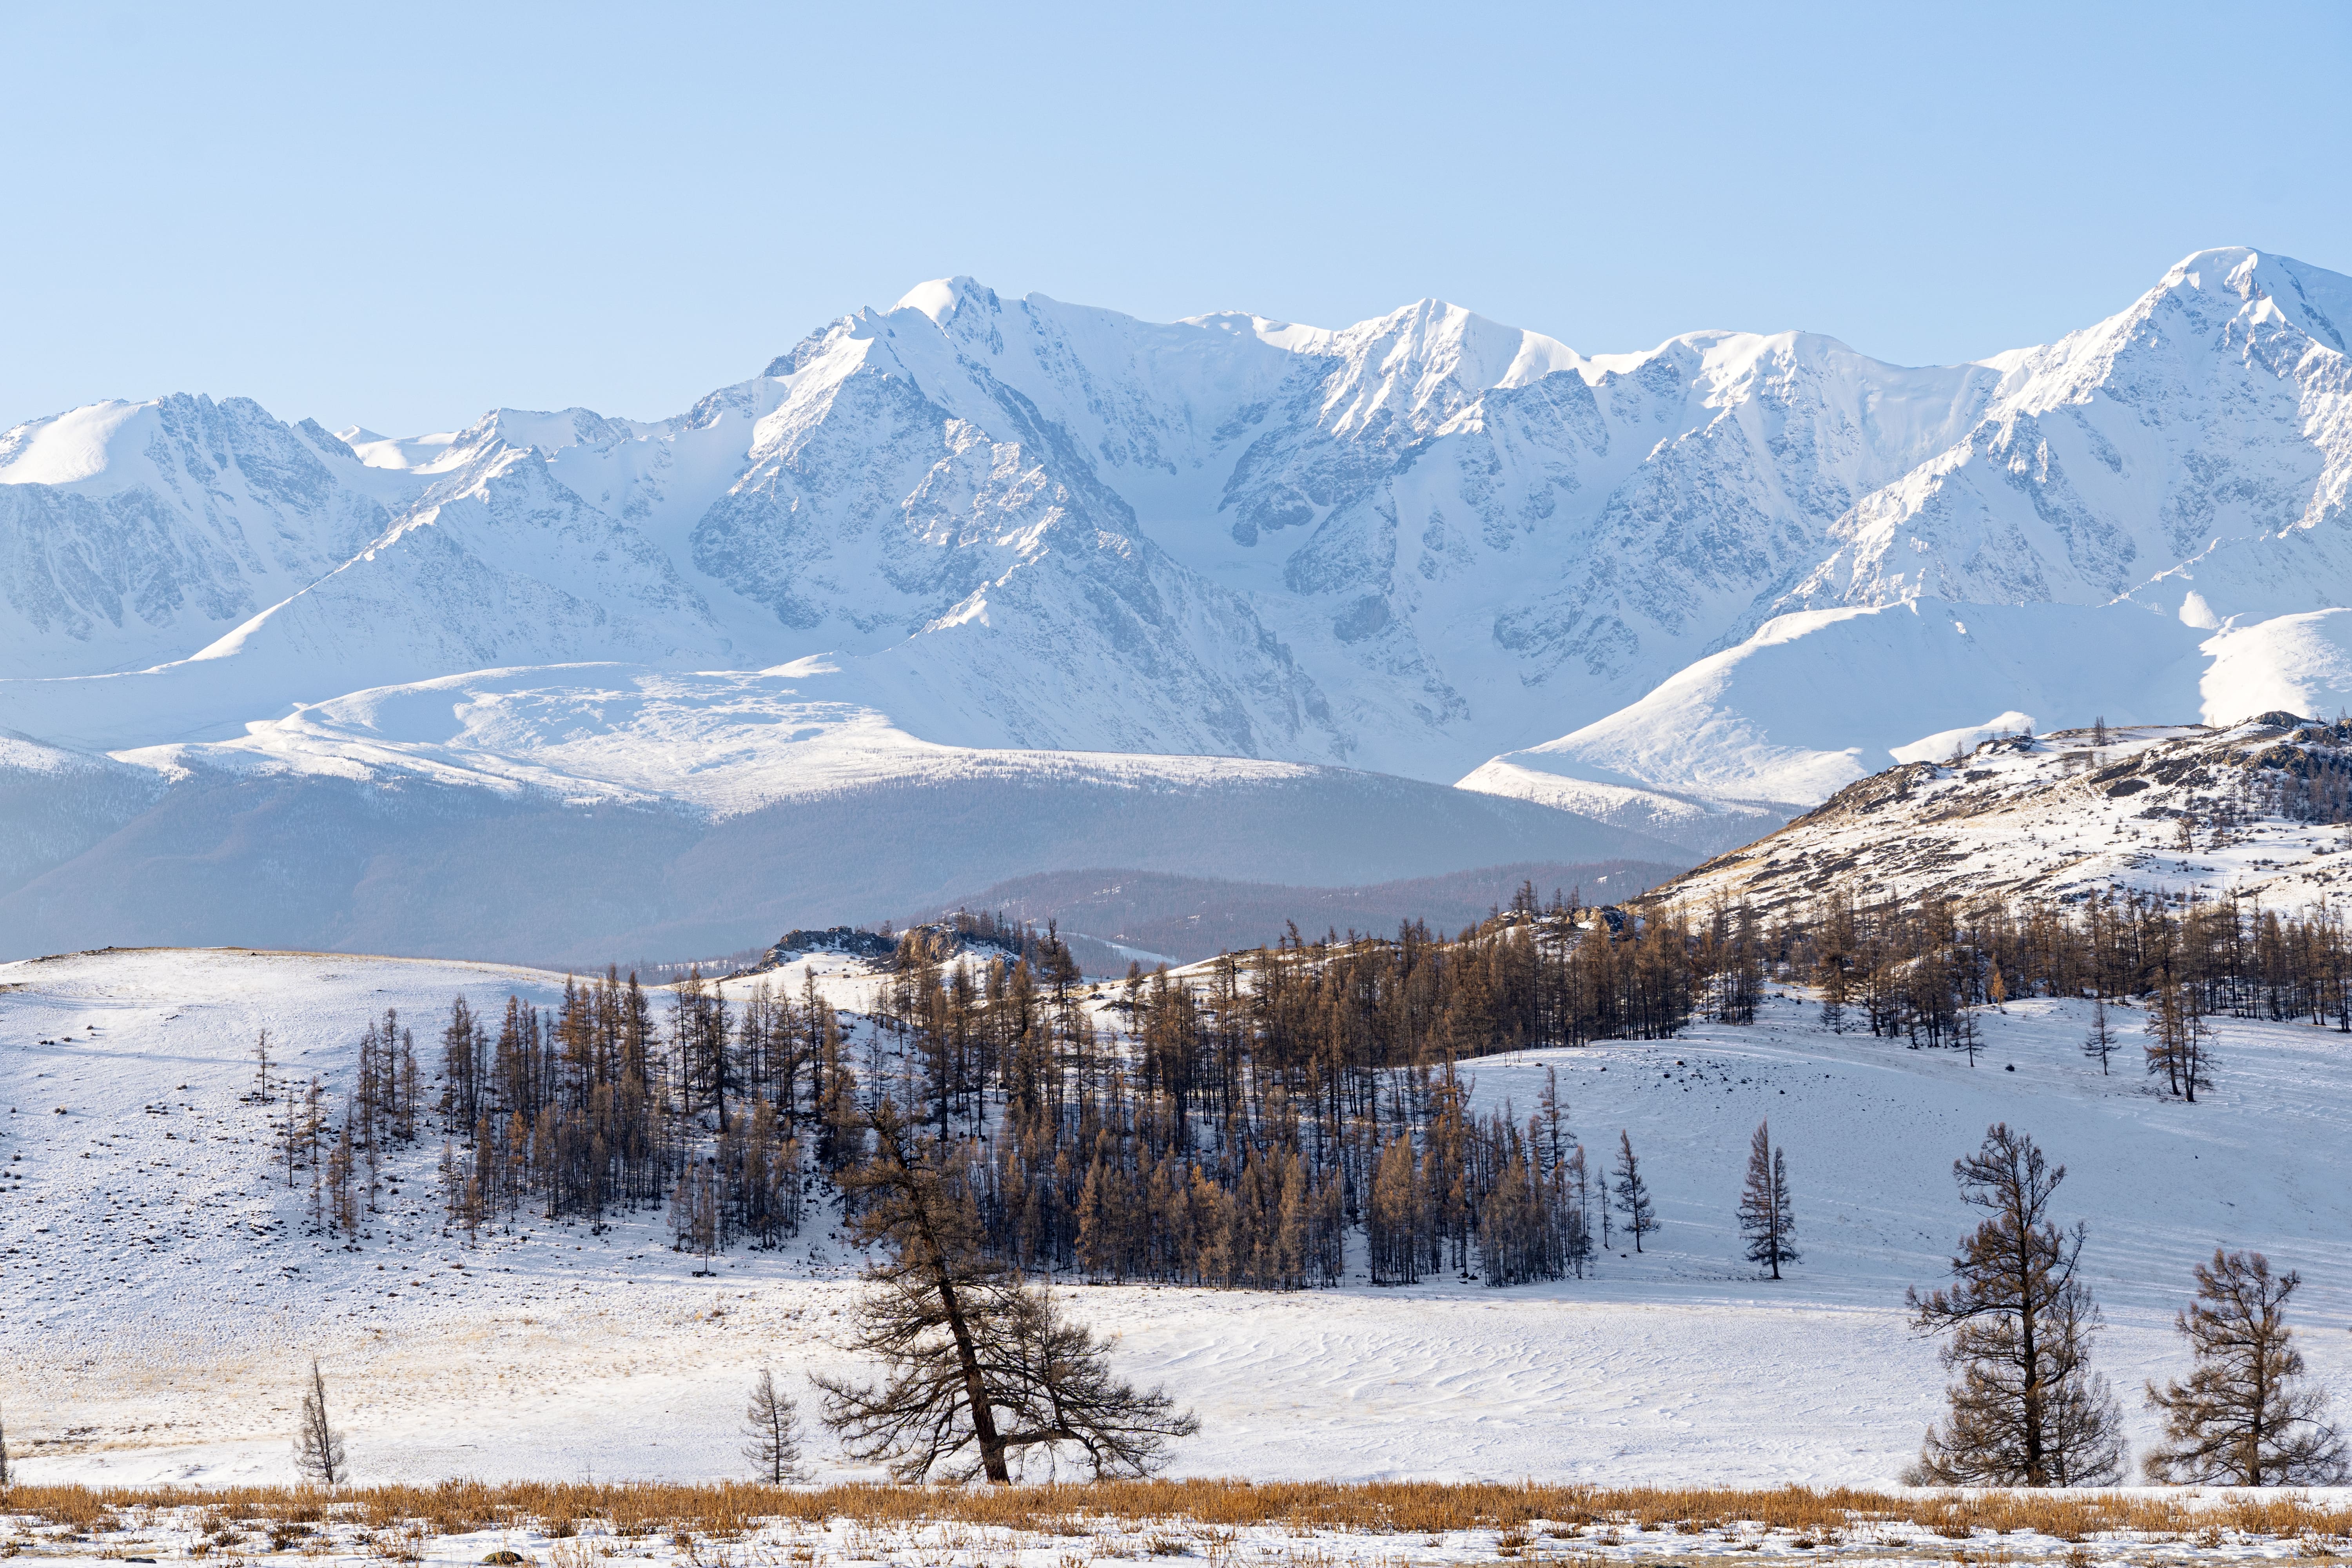 beautiful-snowy-landscape-with-mountains-background-steppe-landscape-altai-mountains-mongolia-min.jpg